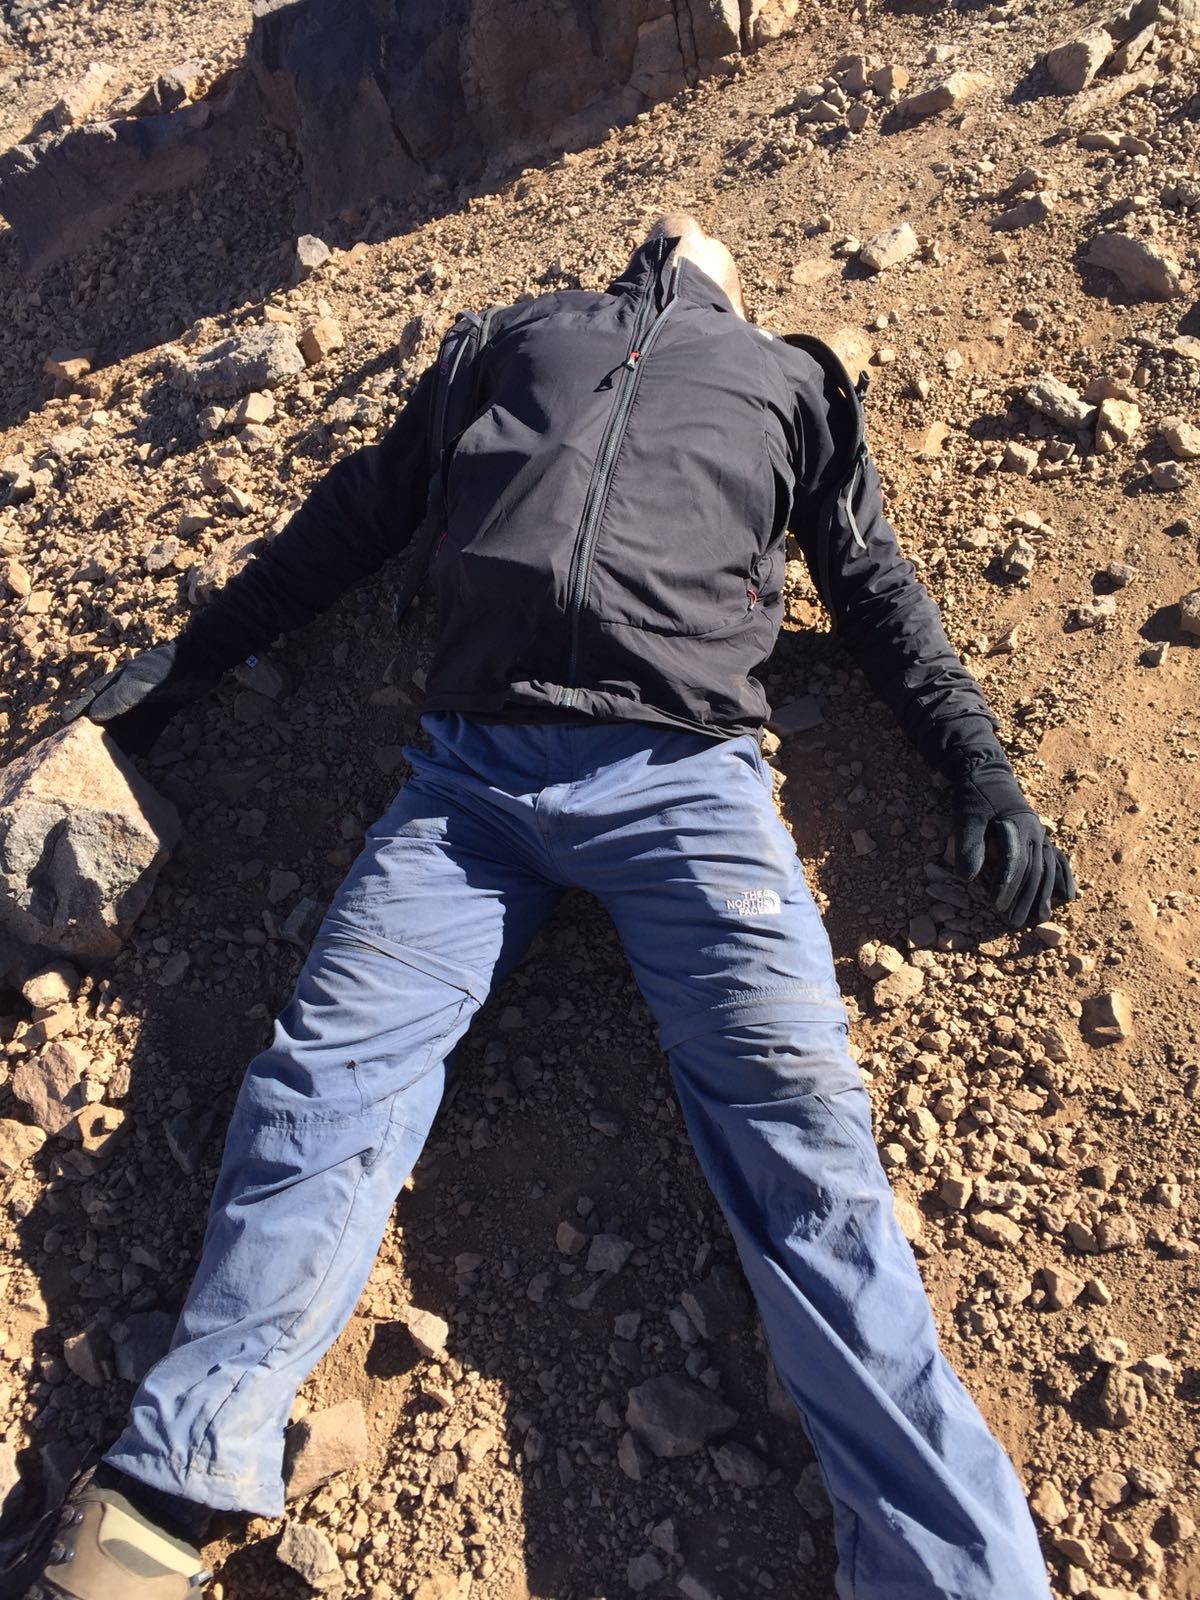 An exhausted hiker collapses on Mount Toubkal.